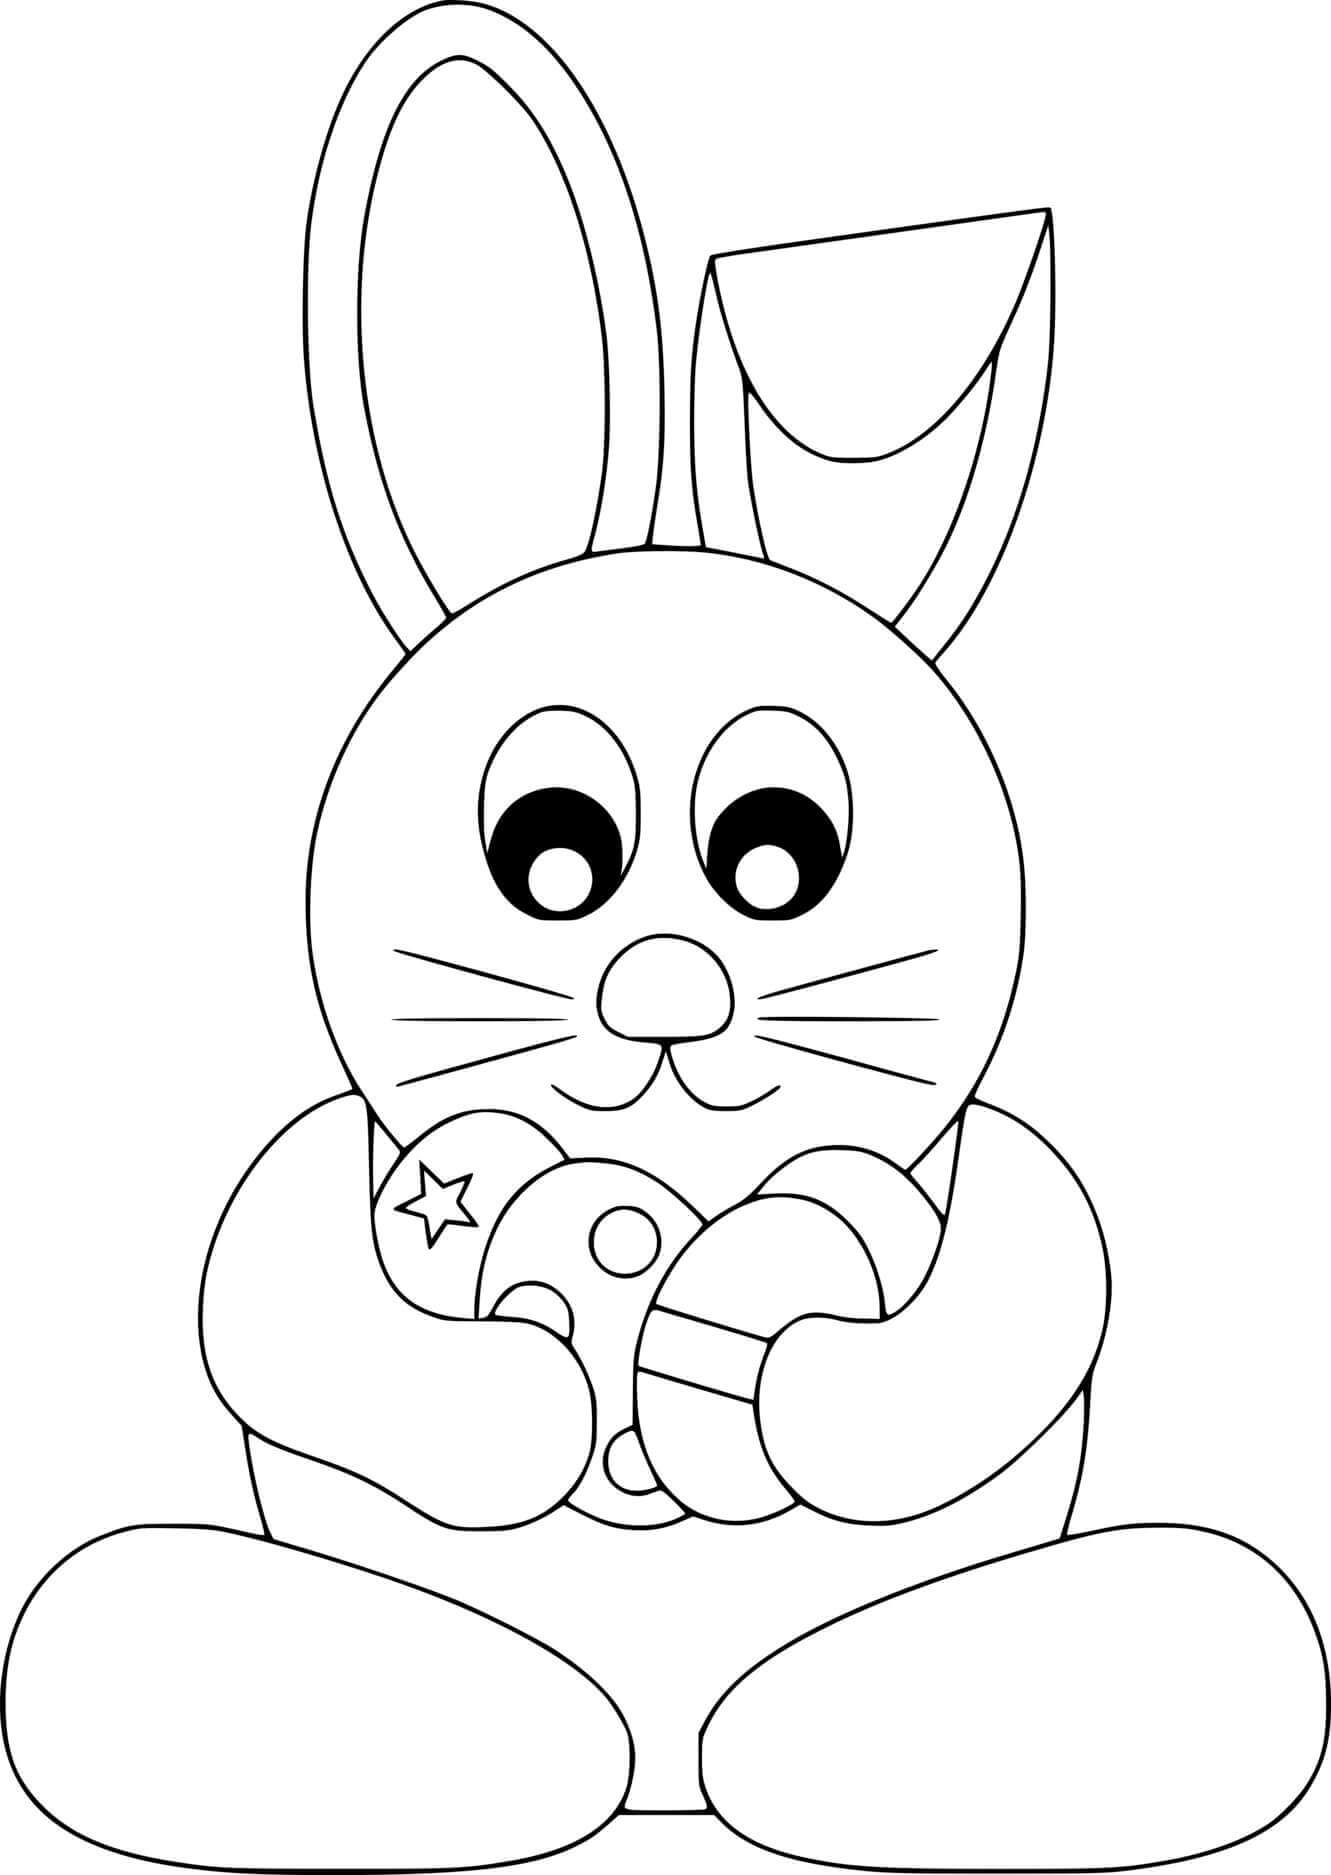 Easy Easter Bunny Holds Eggs Coloring Page